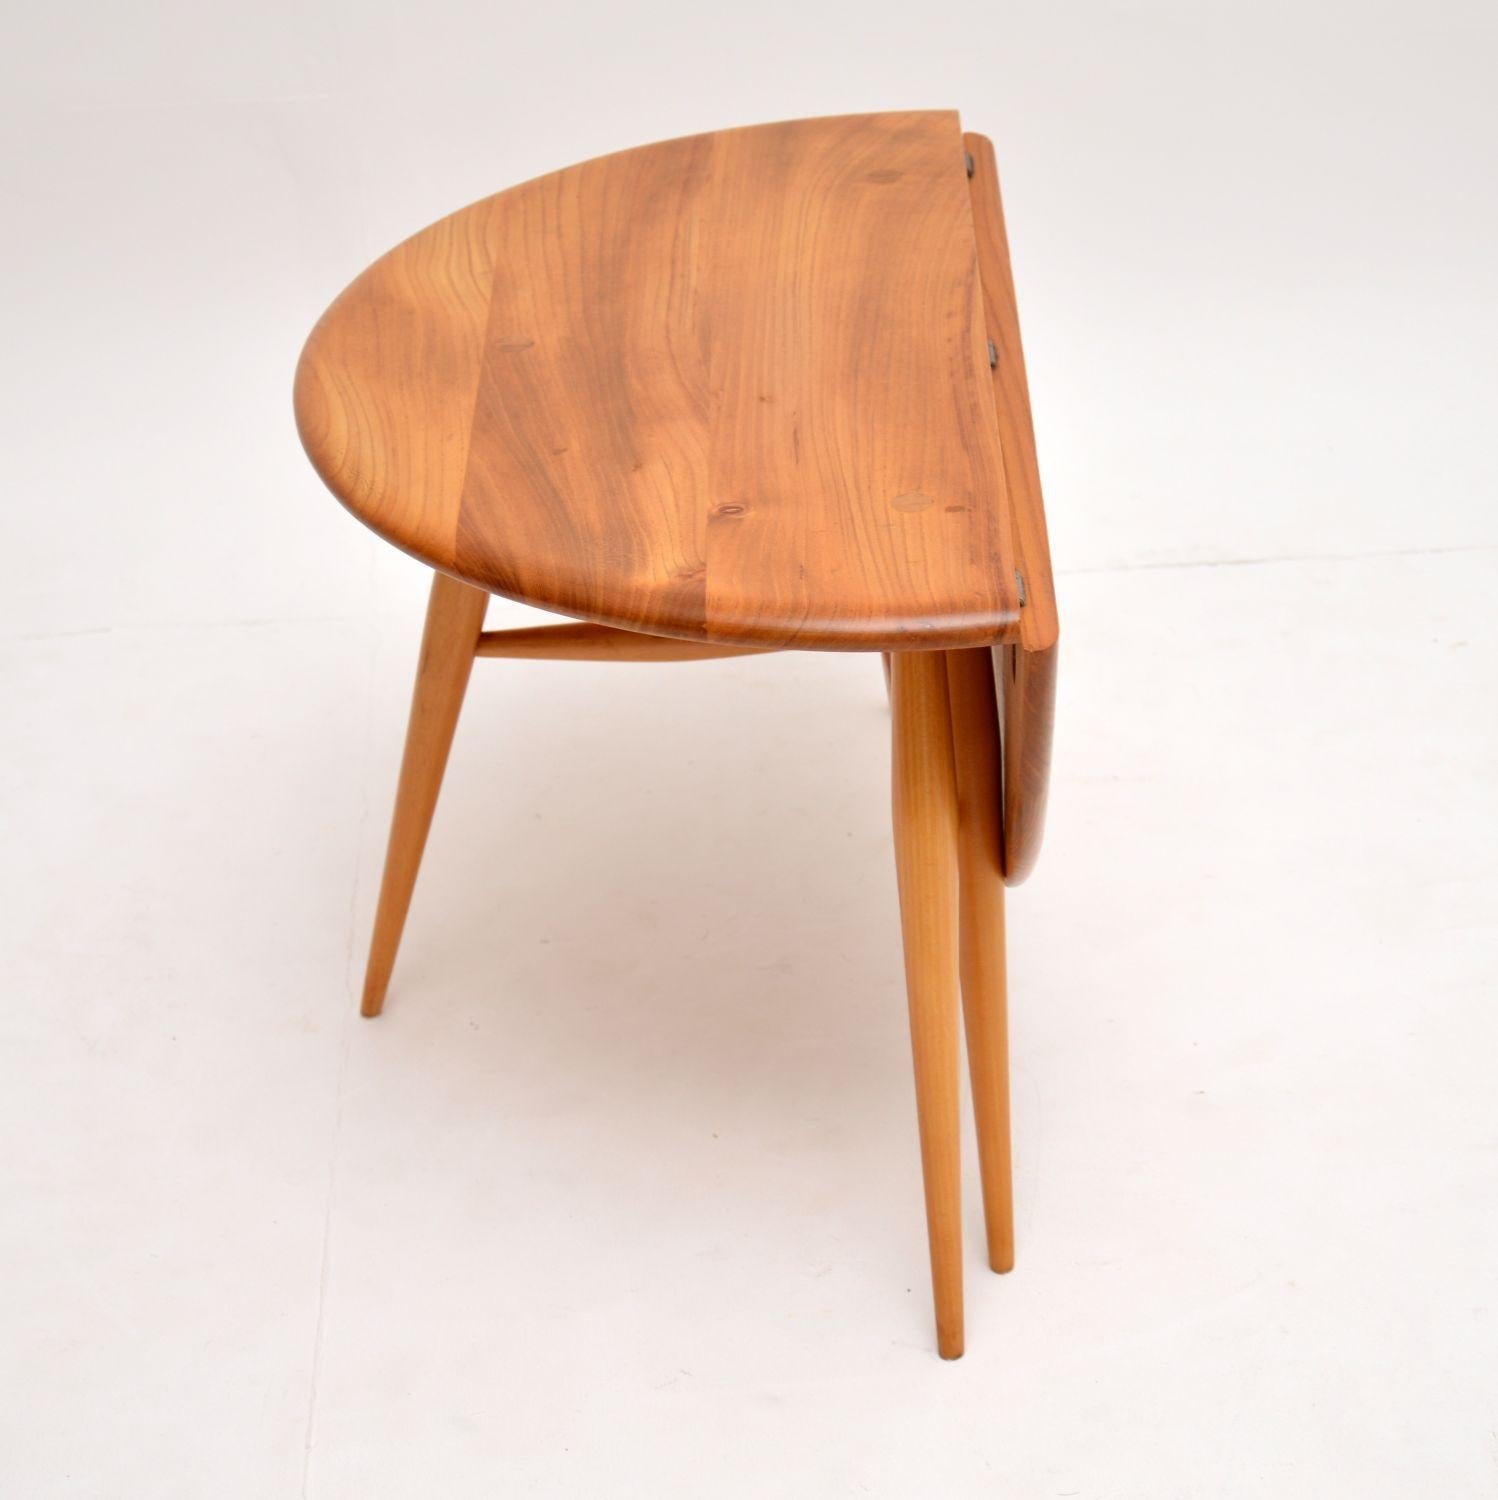 A stunning drop leaf vintage coffee table by Ercol, this dates from the 1960s-1970s. It’s of amazing quality, and is in perfect condition. We have had this completely stripped and re-polished to a very high standard. It’s made from solid elm, with